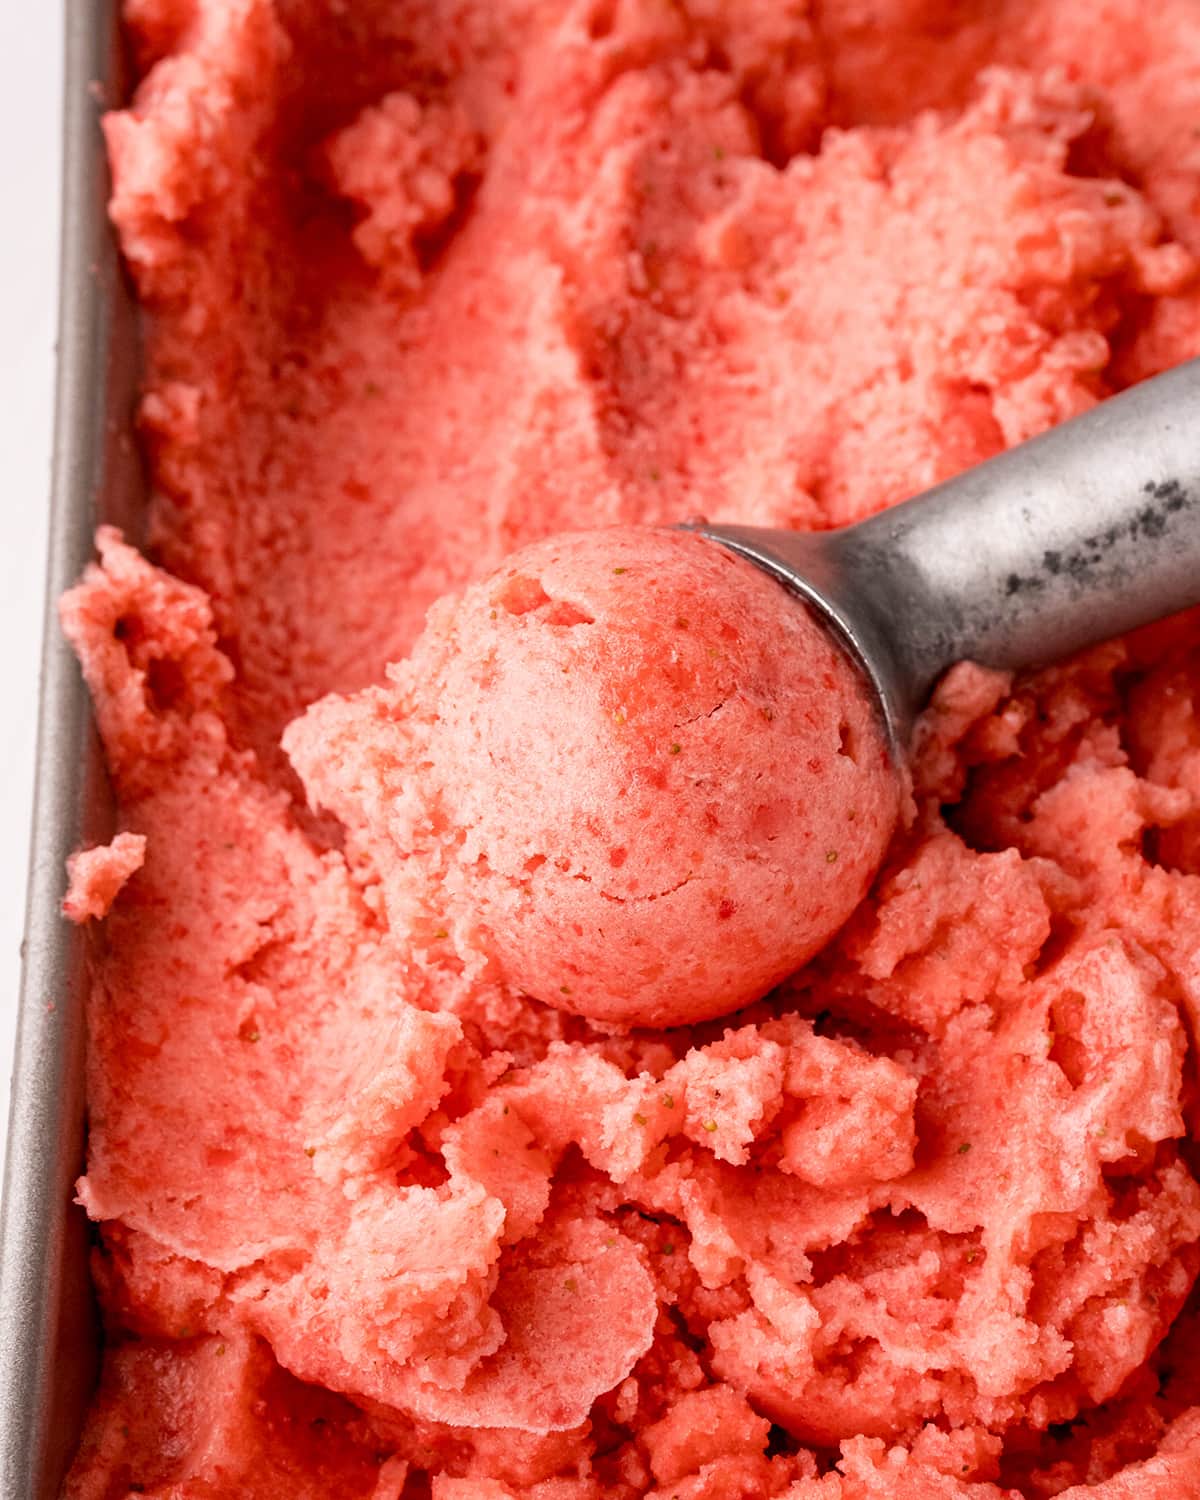 Strawberry pineapple sorbet in a pan, with a round scoop in an ice cream scooper.